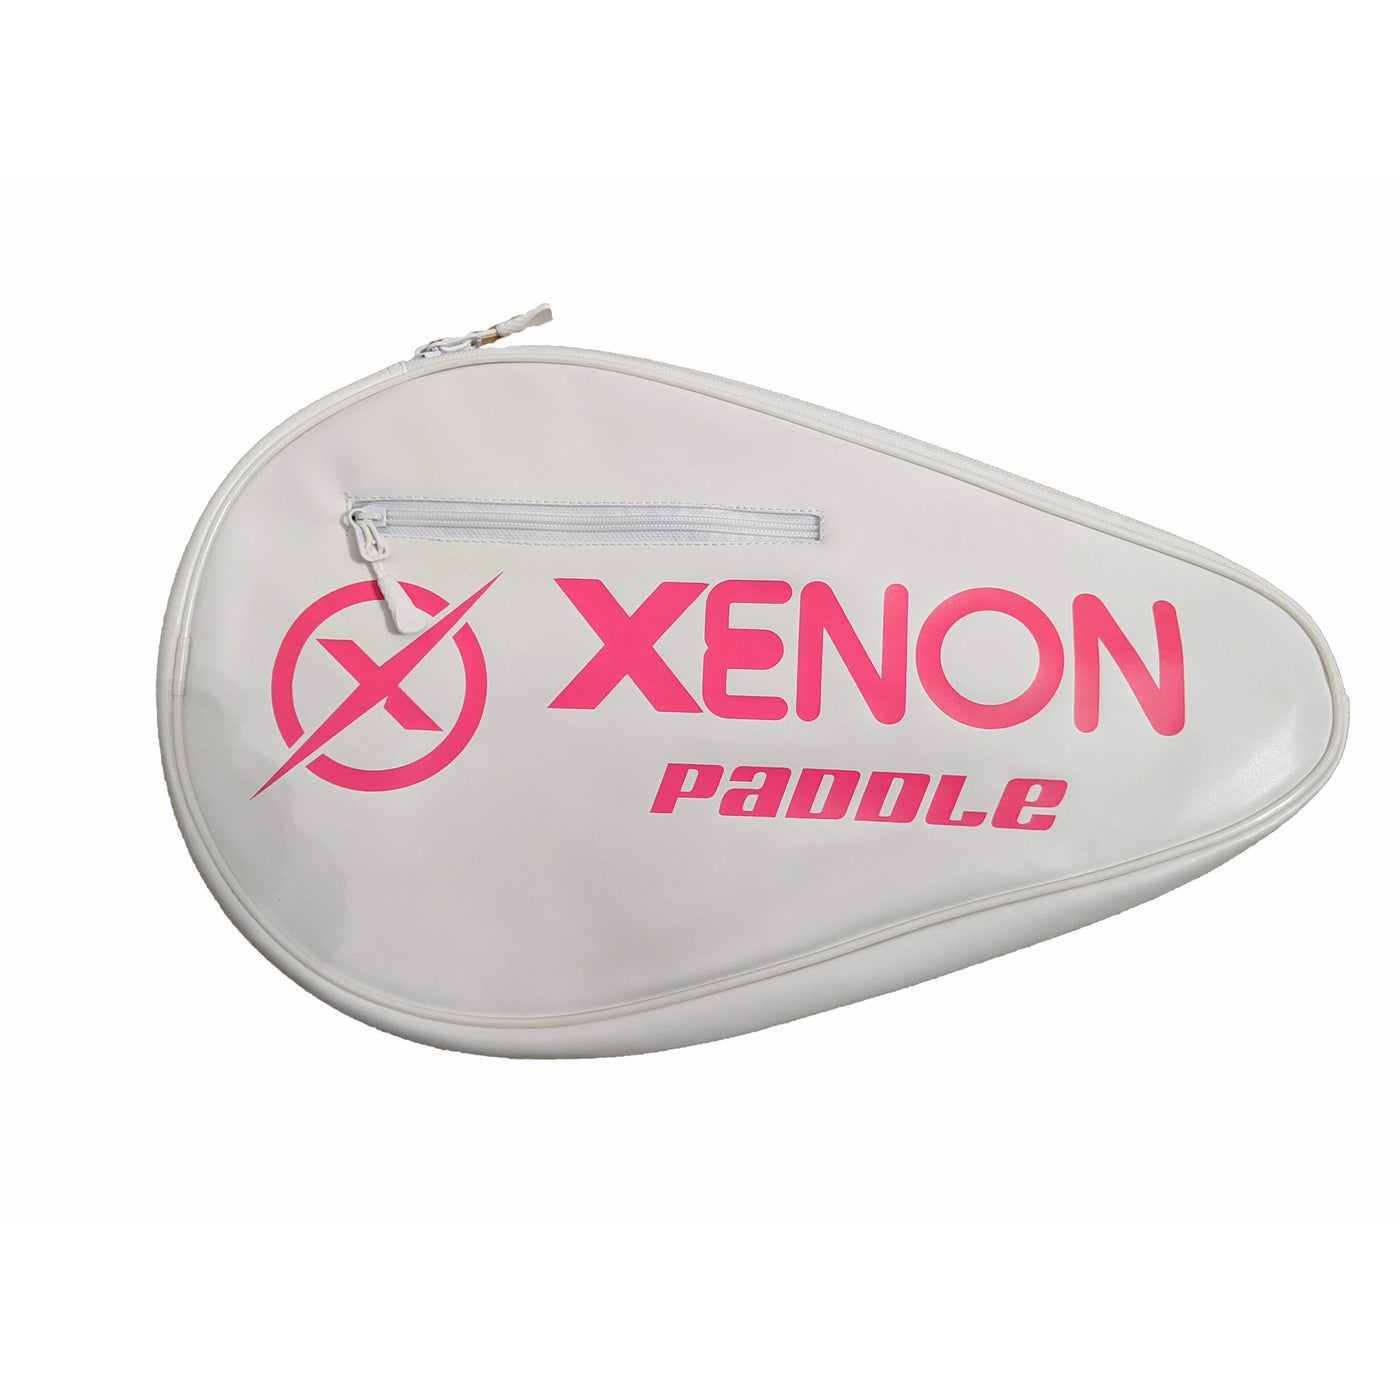 Xenon Paddle tennis racket high quality synthetic leather case white and pink holds phone and keys